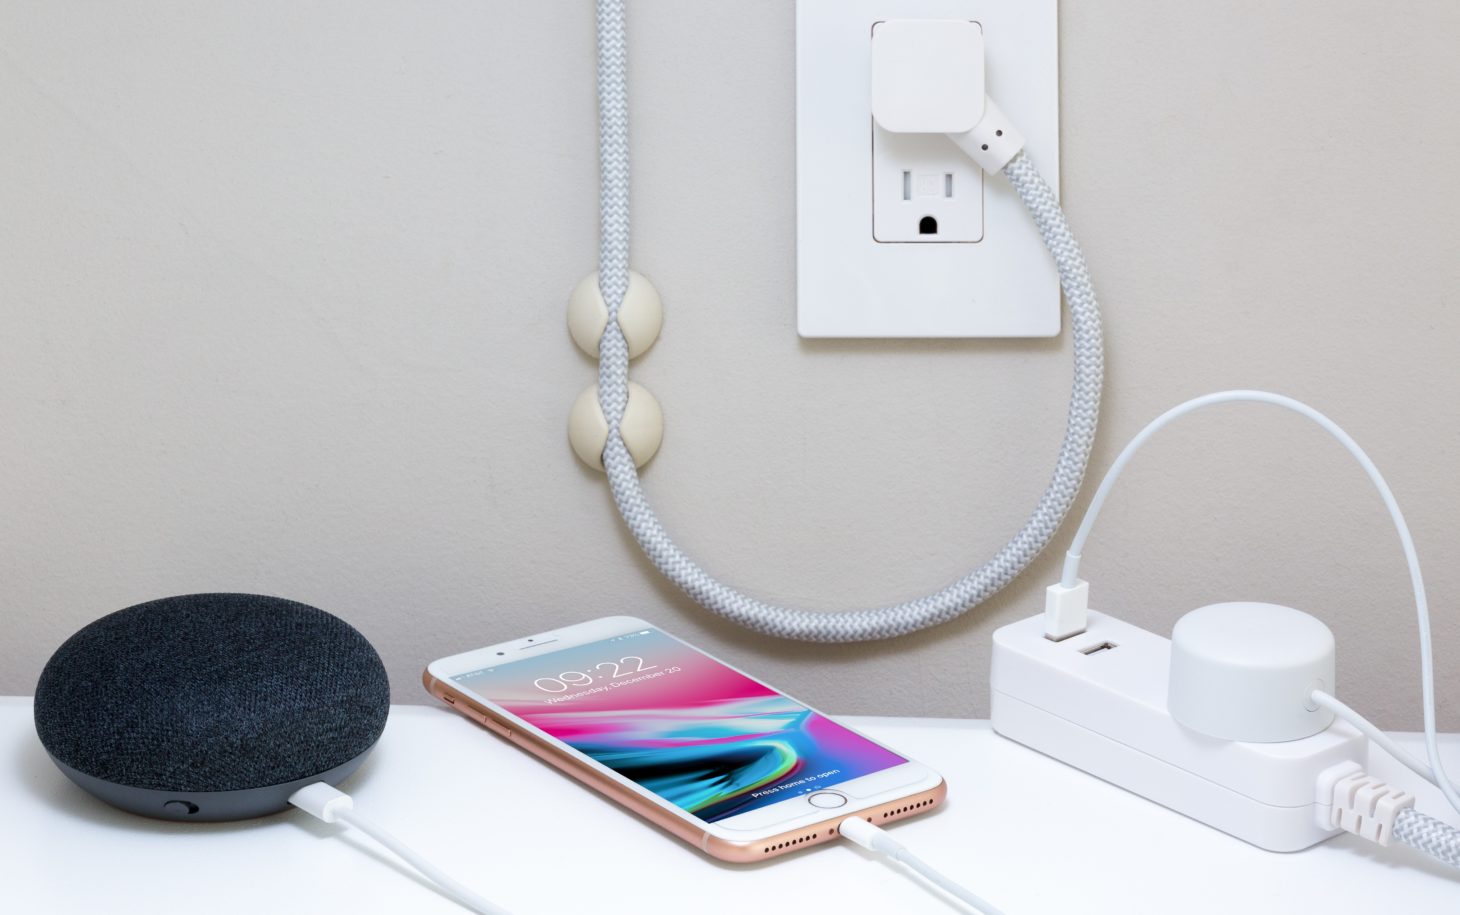 WiFi extender, iPhone, and power strip plugged into a wall outlet